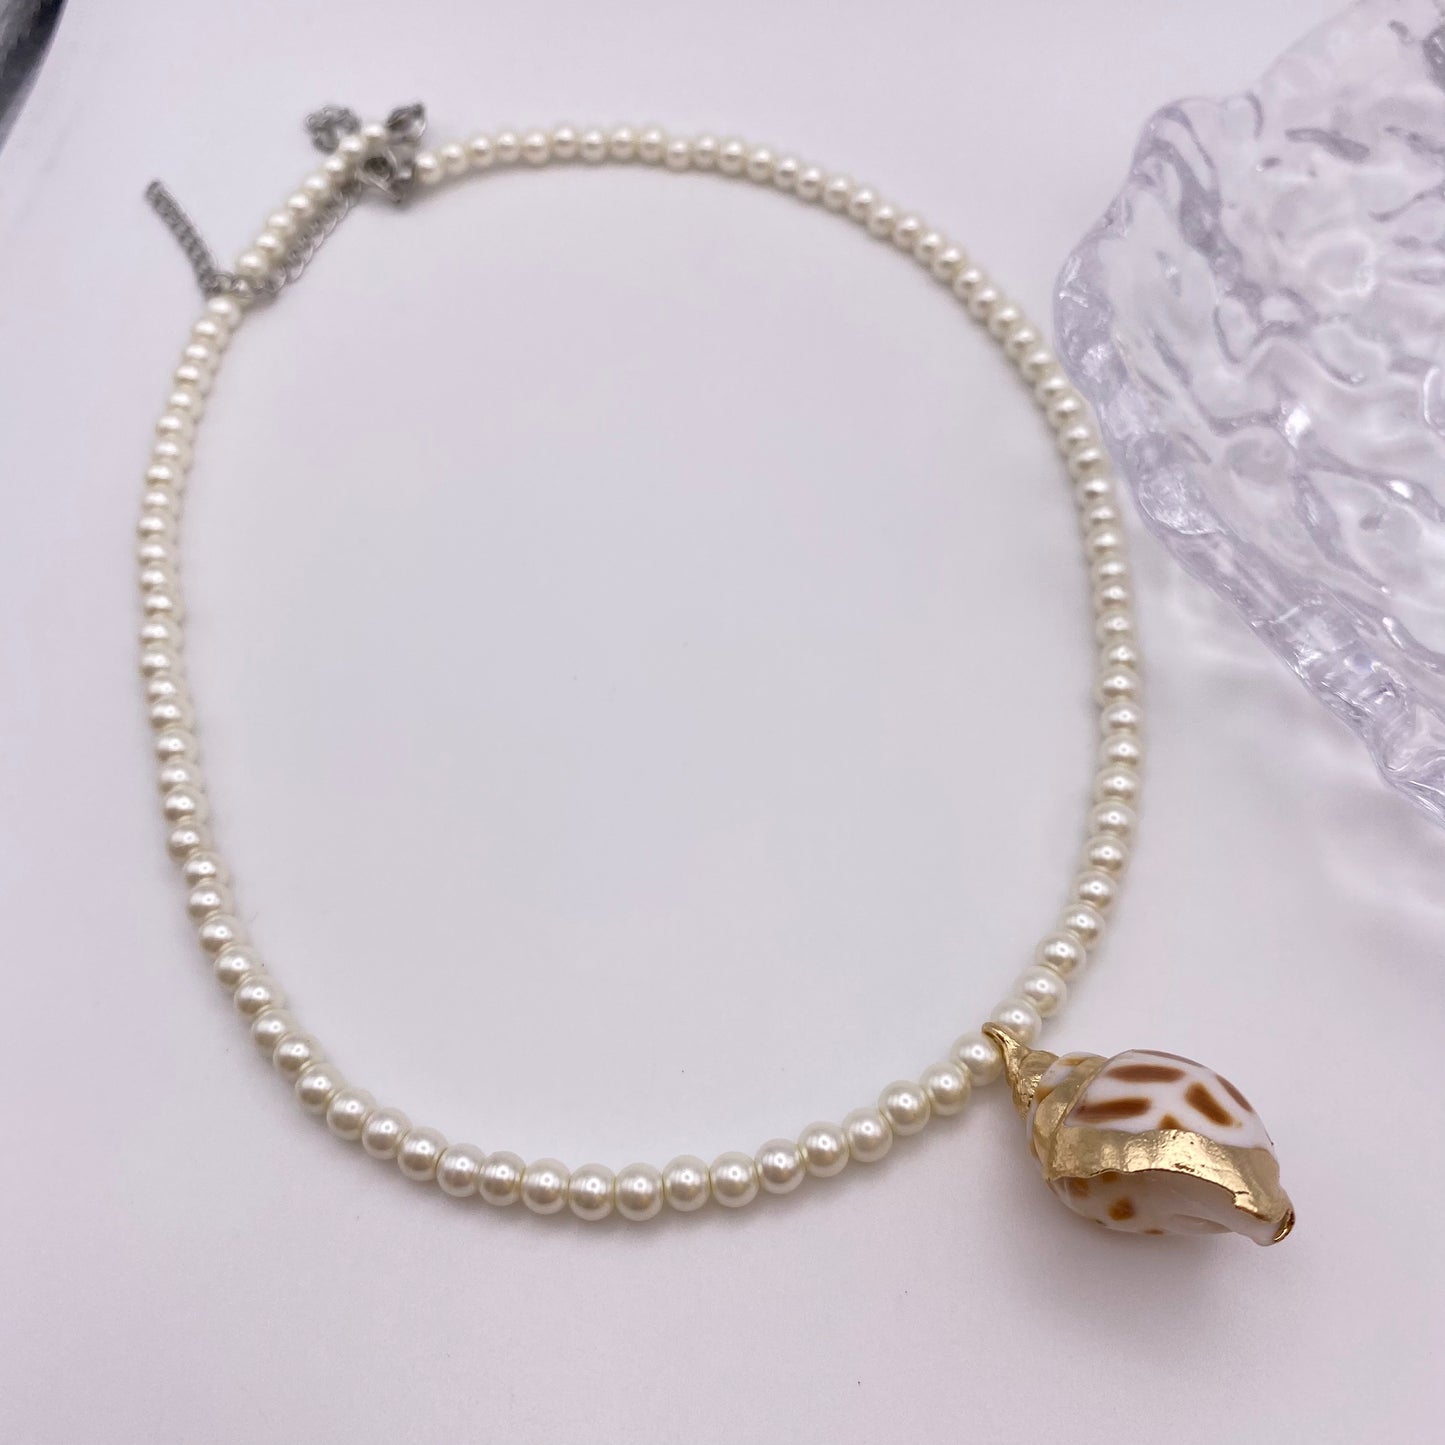 Pearl Beaded Necklace With Conch Shell